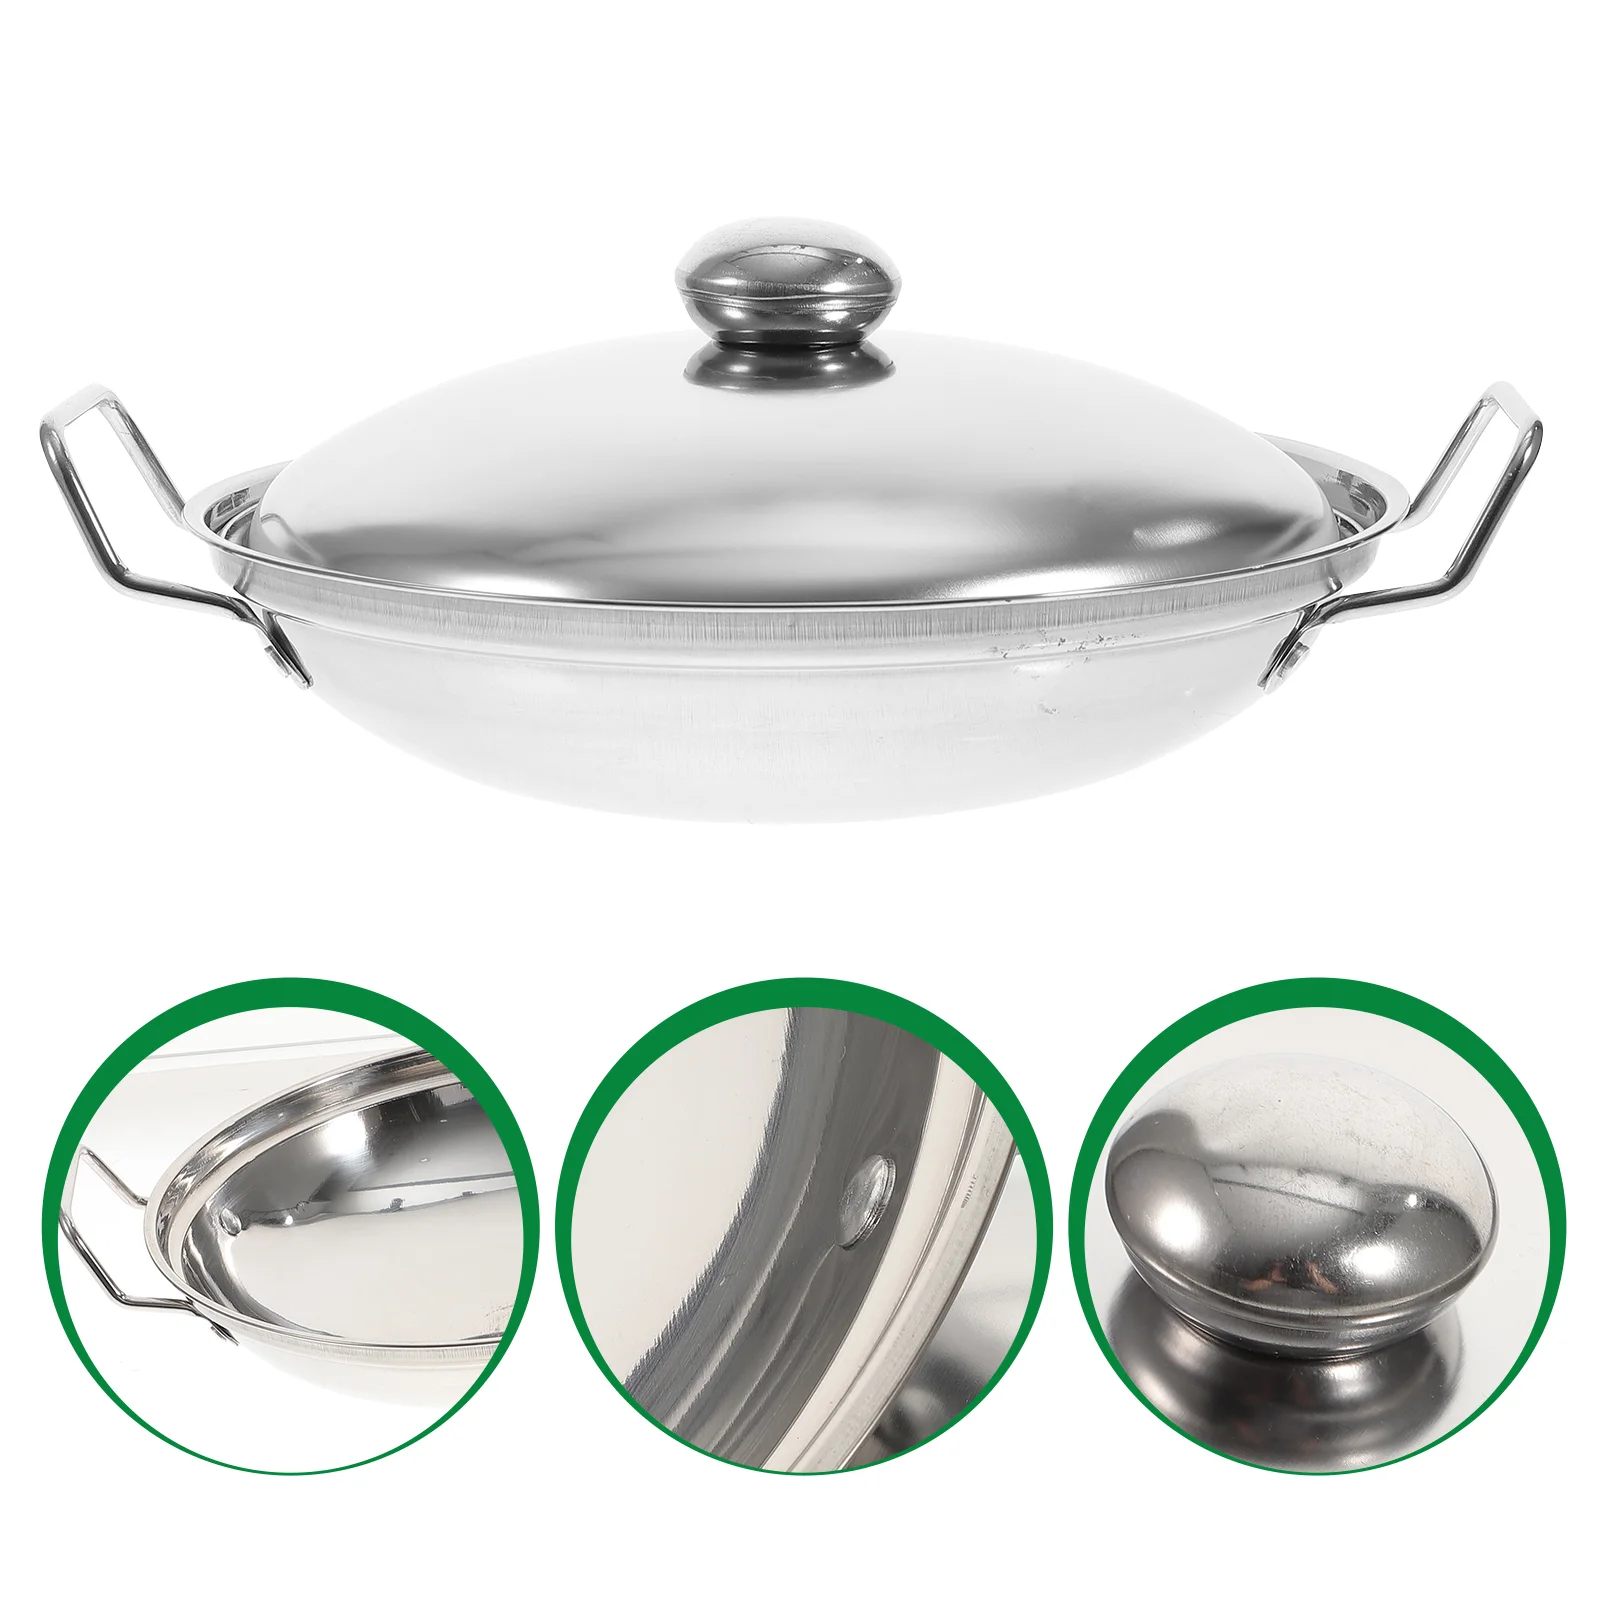 

Pot Pan Wok Hot Cooking Stove Stainless Steel Gas Fry Noodle Sauce Omelette Soup Pasta Kitchen Stir Frying Handle Cookware